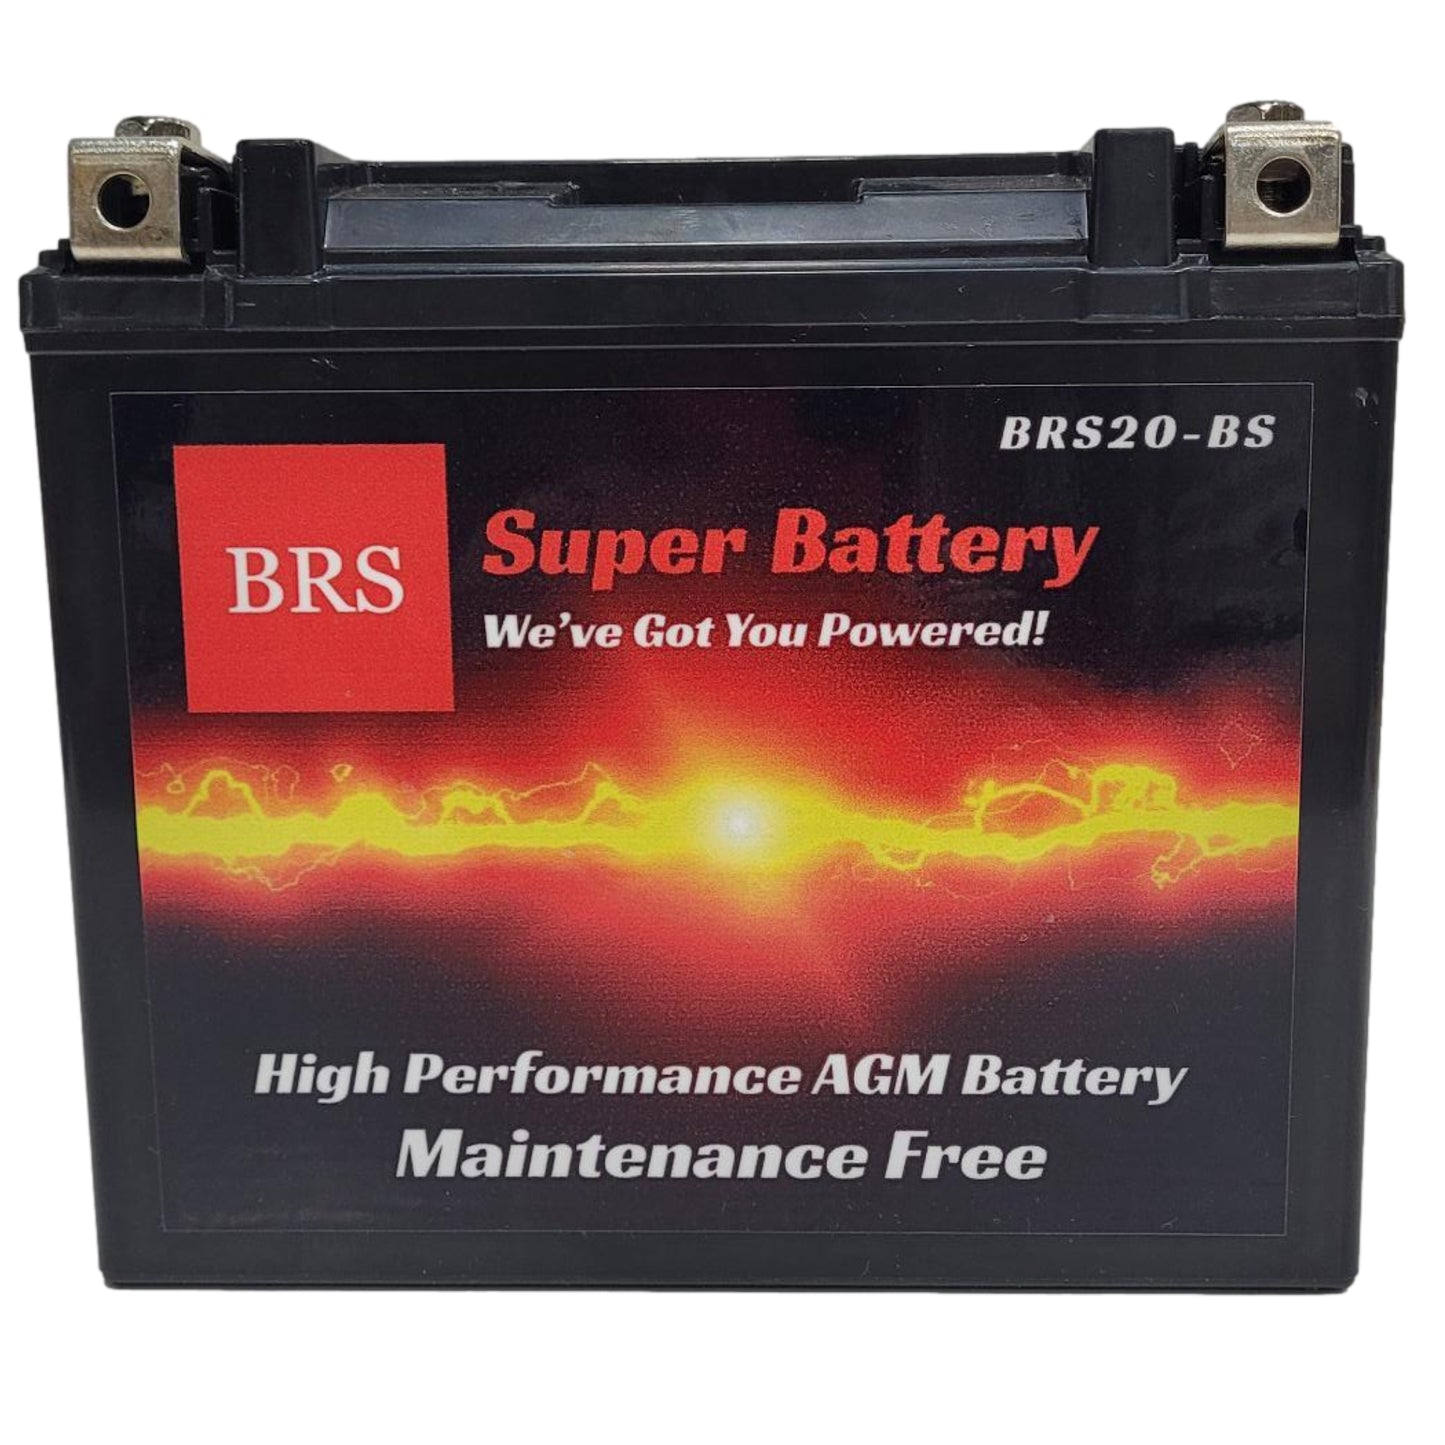 WPX20-BS 12v High Performance Sealed AGM PowerSport 10 Year Battery - BRS Super Battery